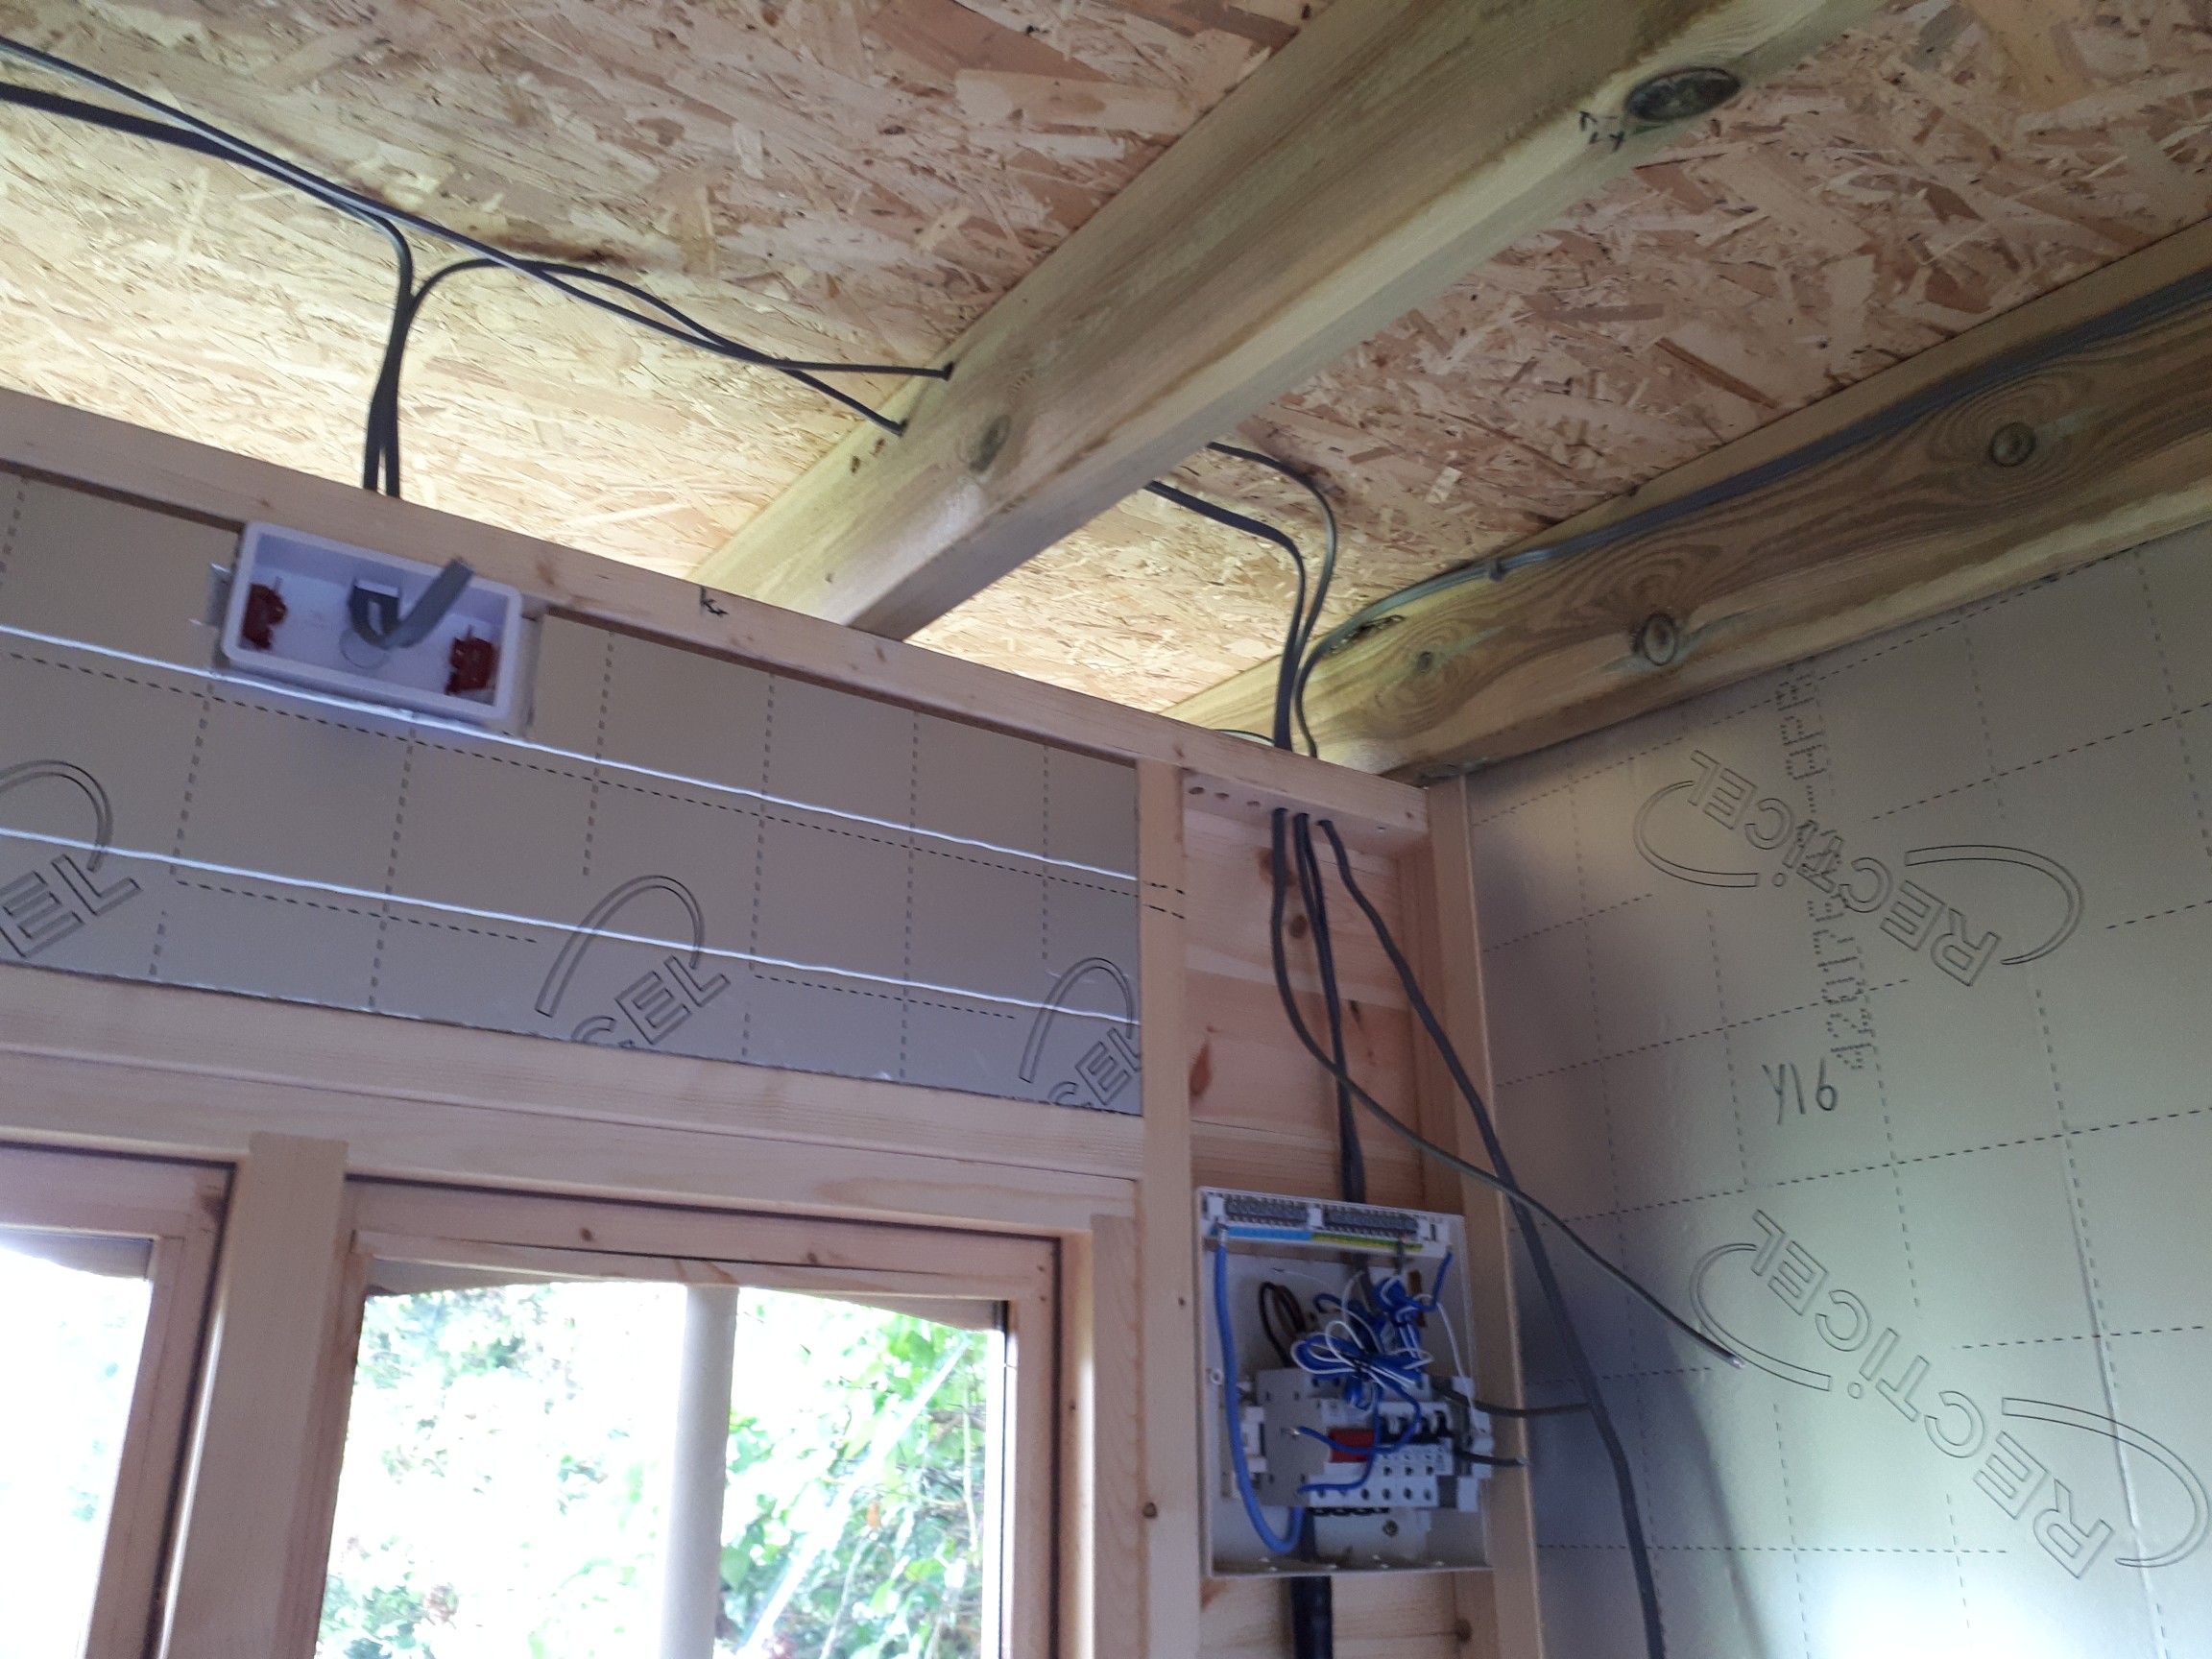 Wiring first fix and consumer unit going in